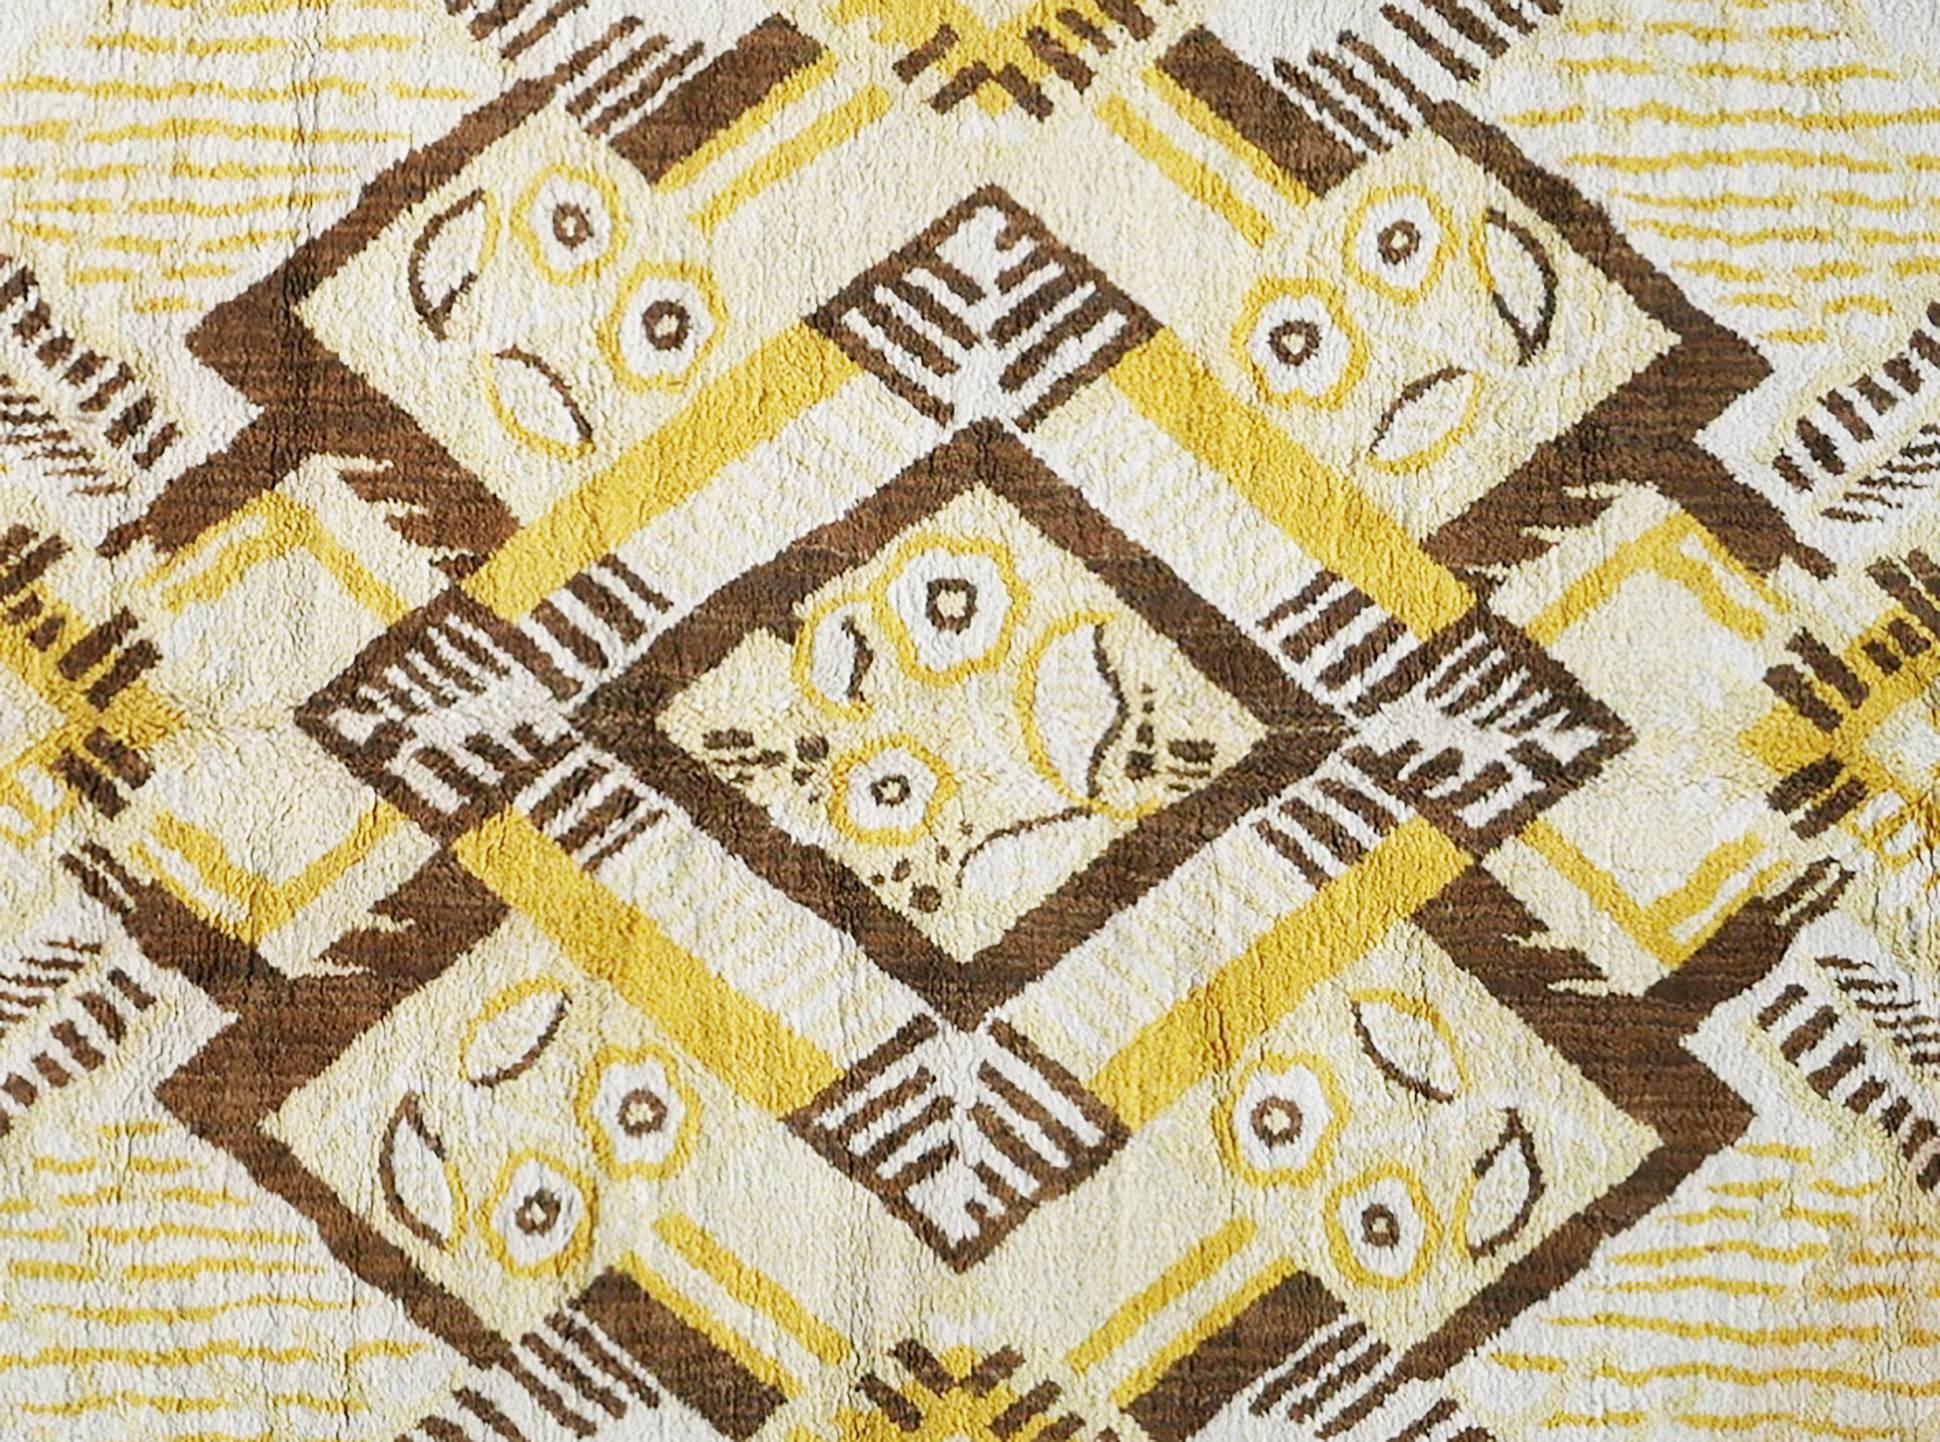 Original Indian Art Deco rug.
Handwoven.
Circa 1940.
Composition: Cotton.
Dimensions: 295 x 200 cm.

The rug is representative of Indian 1940s beautiful Art Deco rugs.

Art Deco is an influential visual arts design style that first appeared